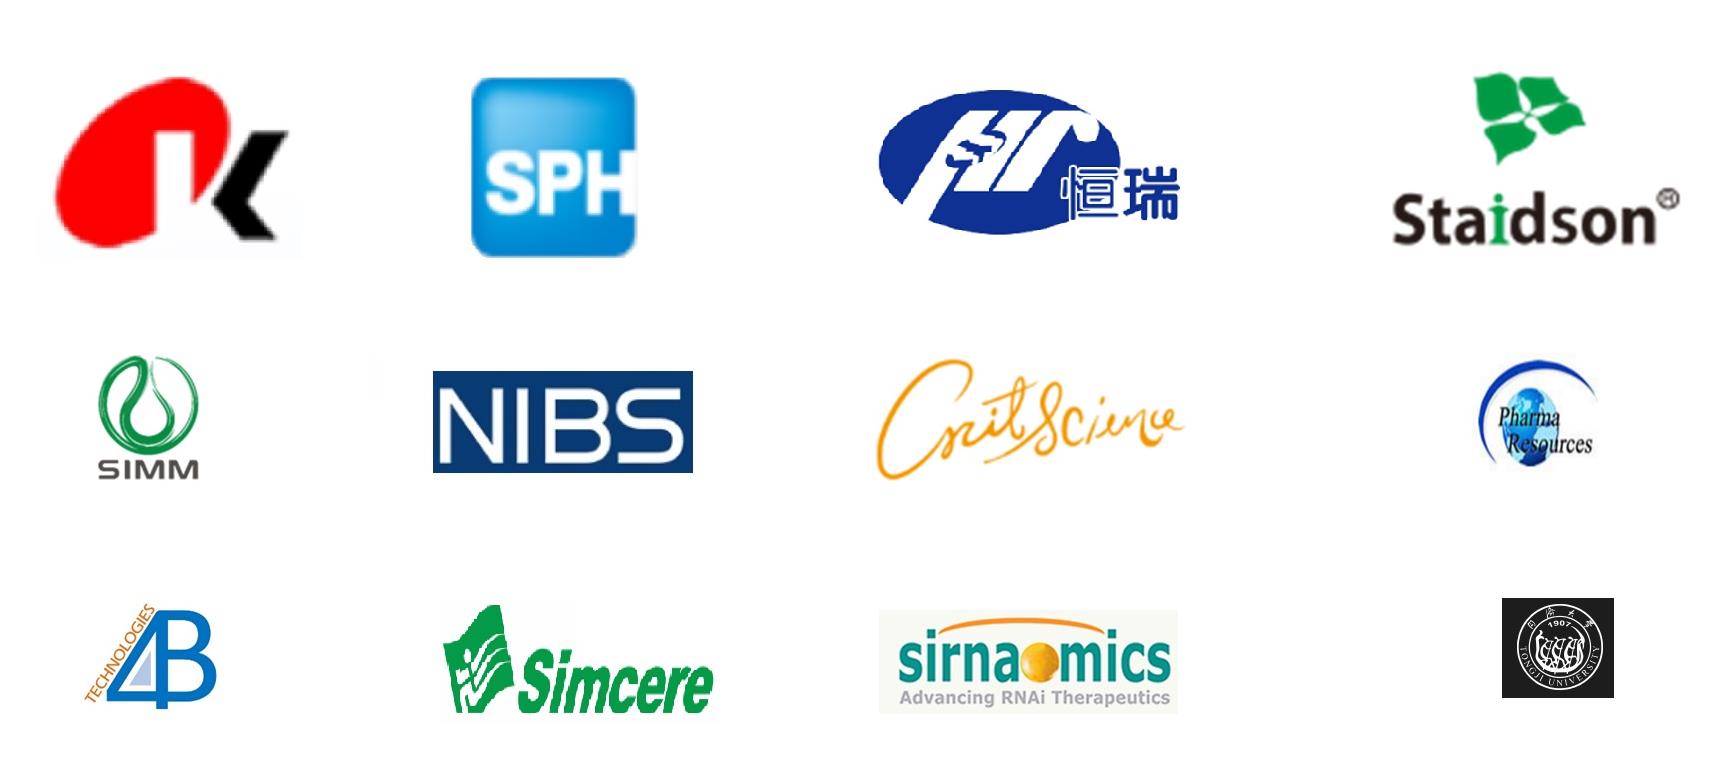 Integle ELN-customers-clients-Simcere-4b-pharma resources-staidson-hengrui-SIMM-NIBS-SPH-Gritscience